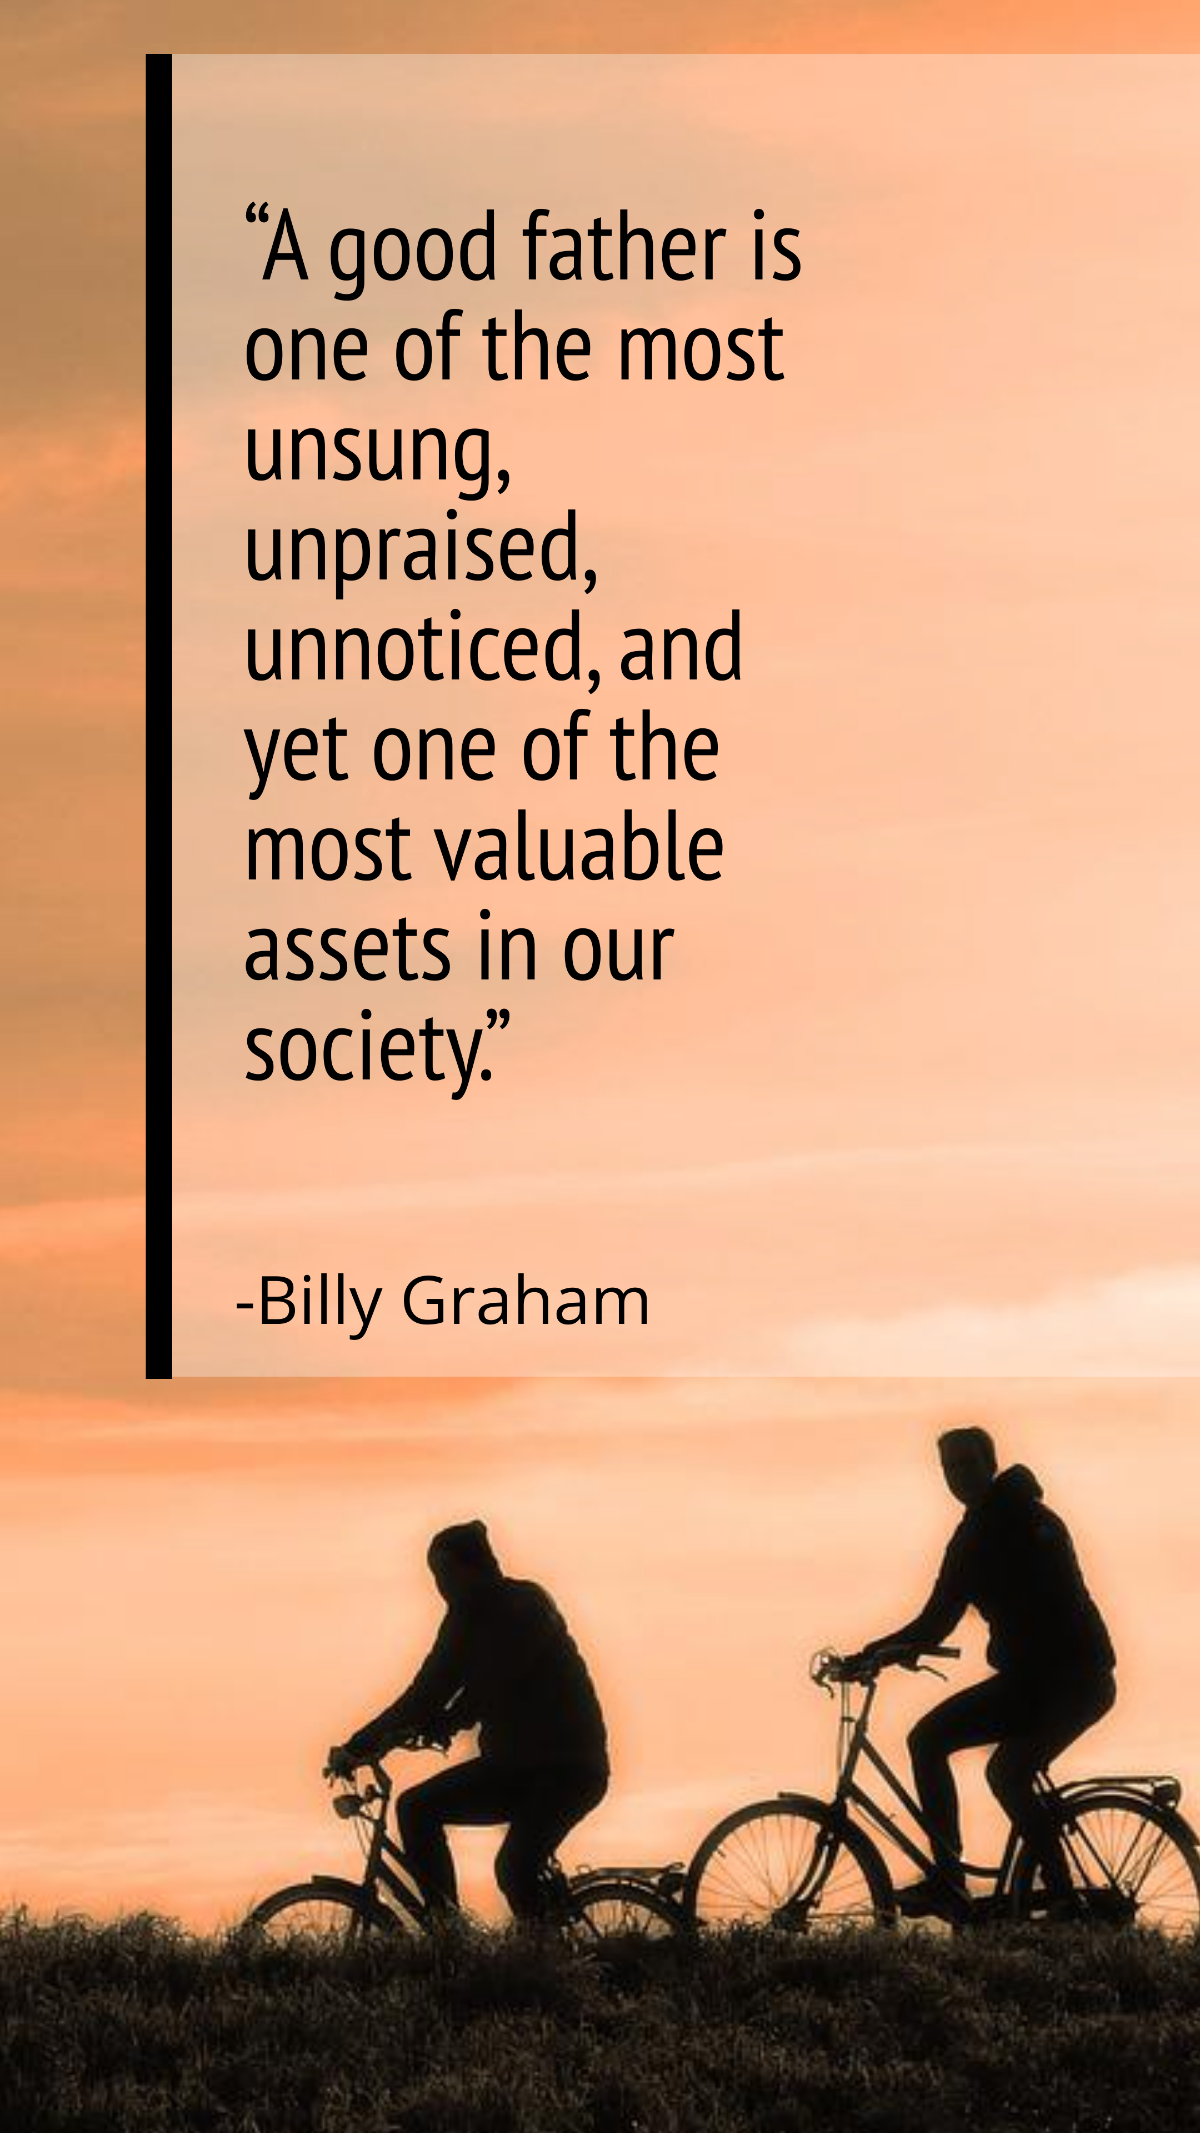 Billy Graham-“A good father is one of the most unsung, unpraised, unnoticed, and yet one of the most valuable assets in our society.” Template